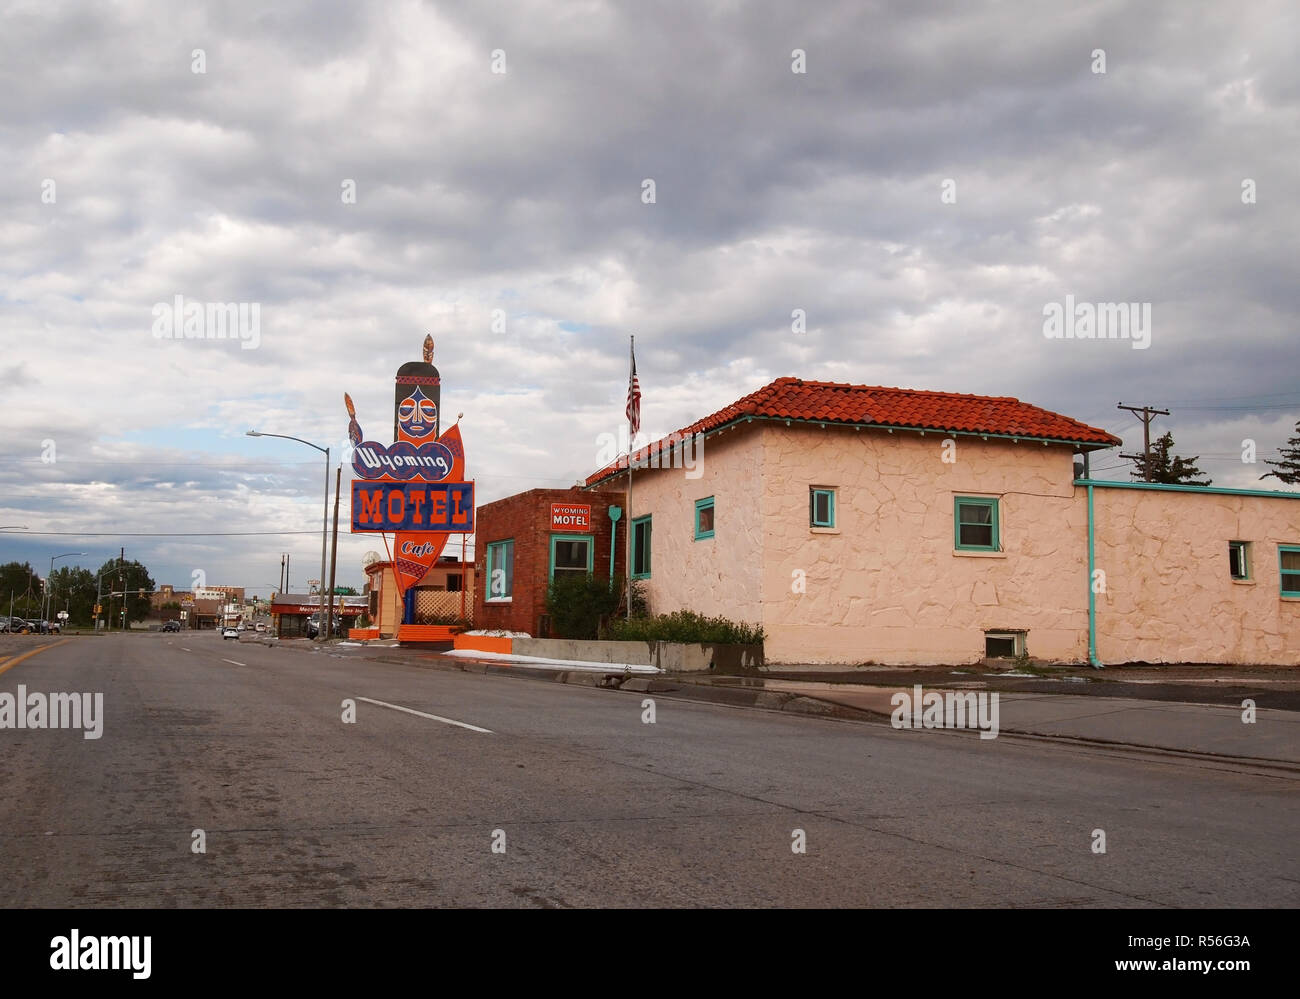 CHEYENNE, WY - JULY 25, 2018: Built in 1936, the iconic Wyoming Motel is an example of the type of fun, kitsch themed drive-in motels that sprang up a Stock Photo